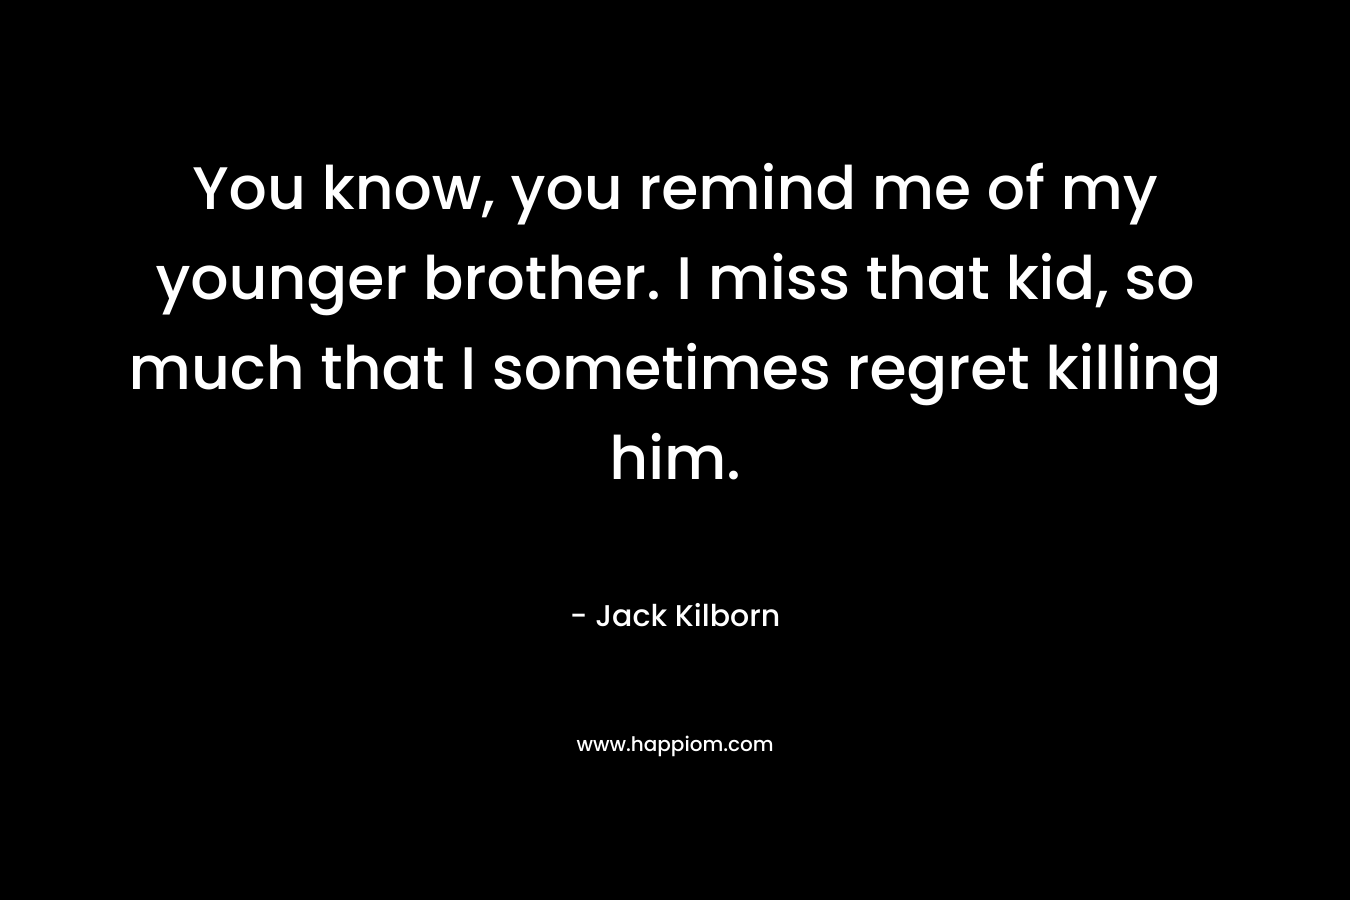 You know, you remind me of my younger brother. I miss that kid, so much that I sometimes regret killing him. – Jack Kilborn